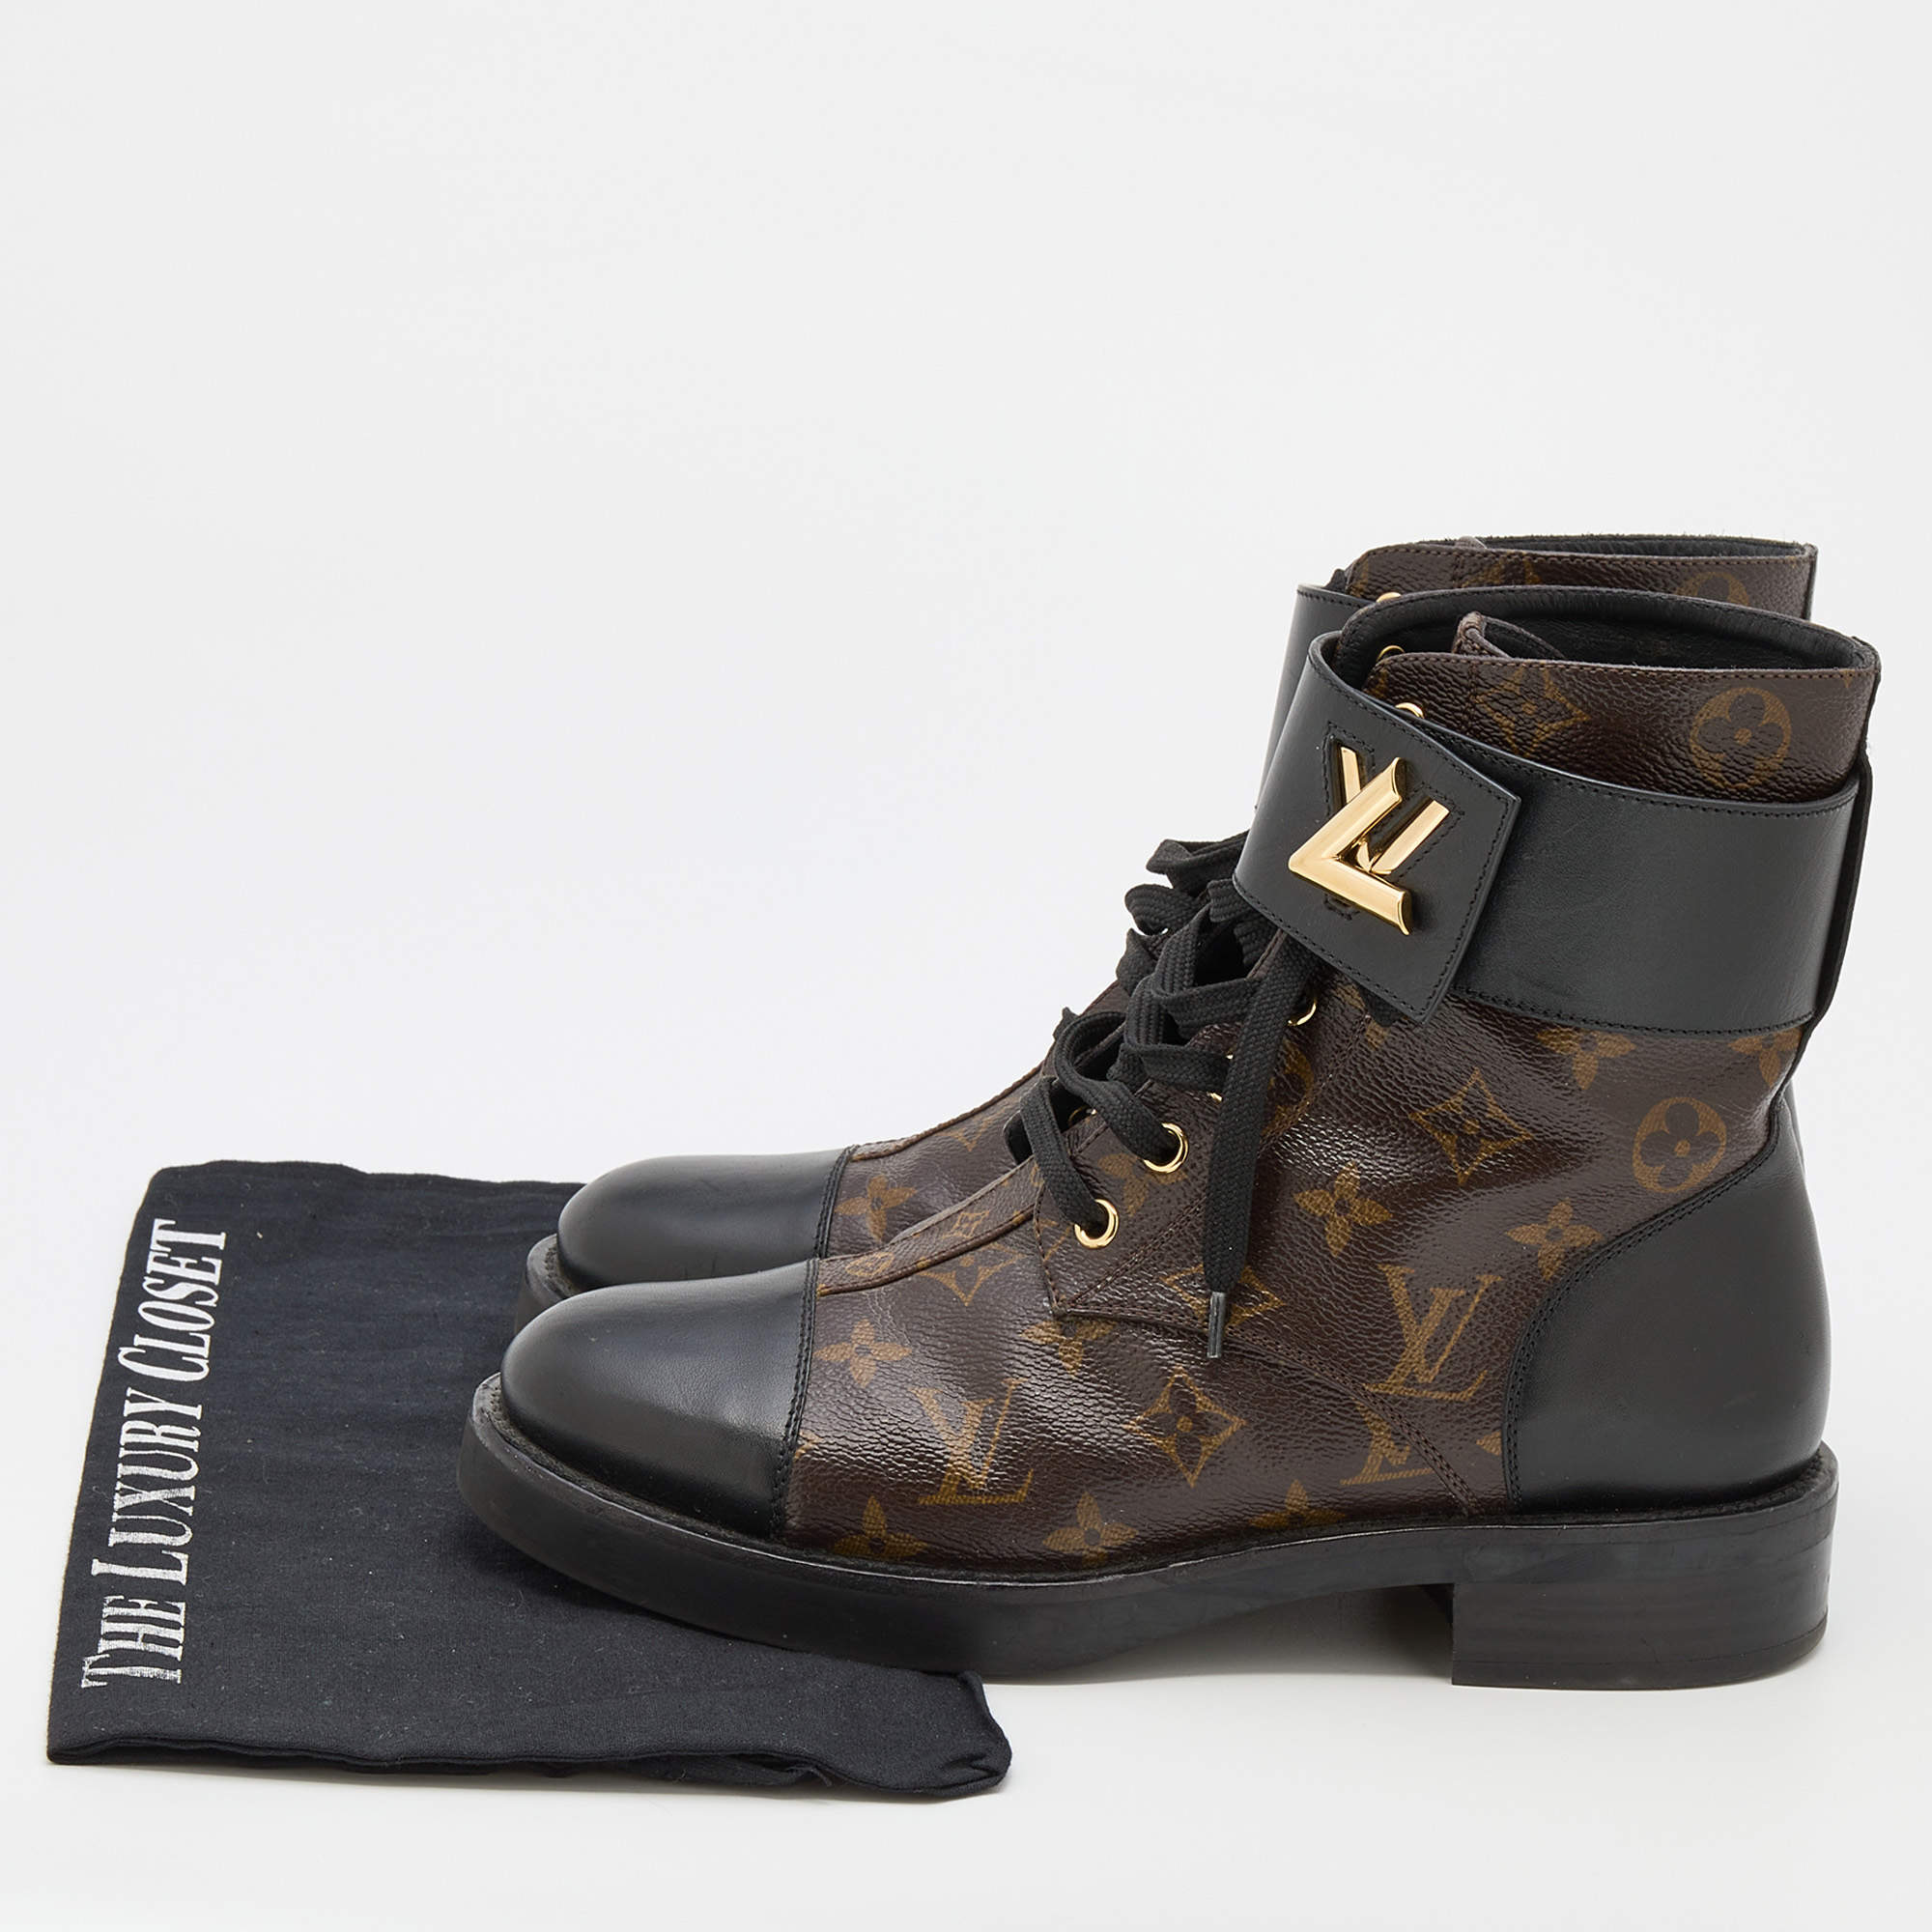 LV leopard boots  Combat boots style, Lv boots, Luxury boots